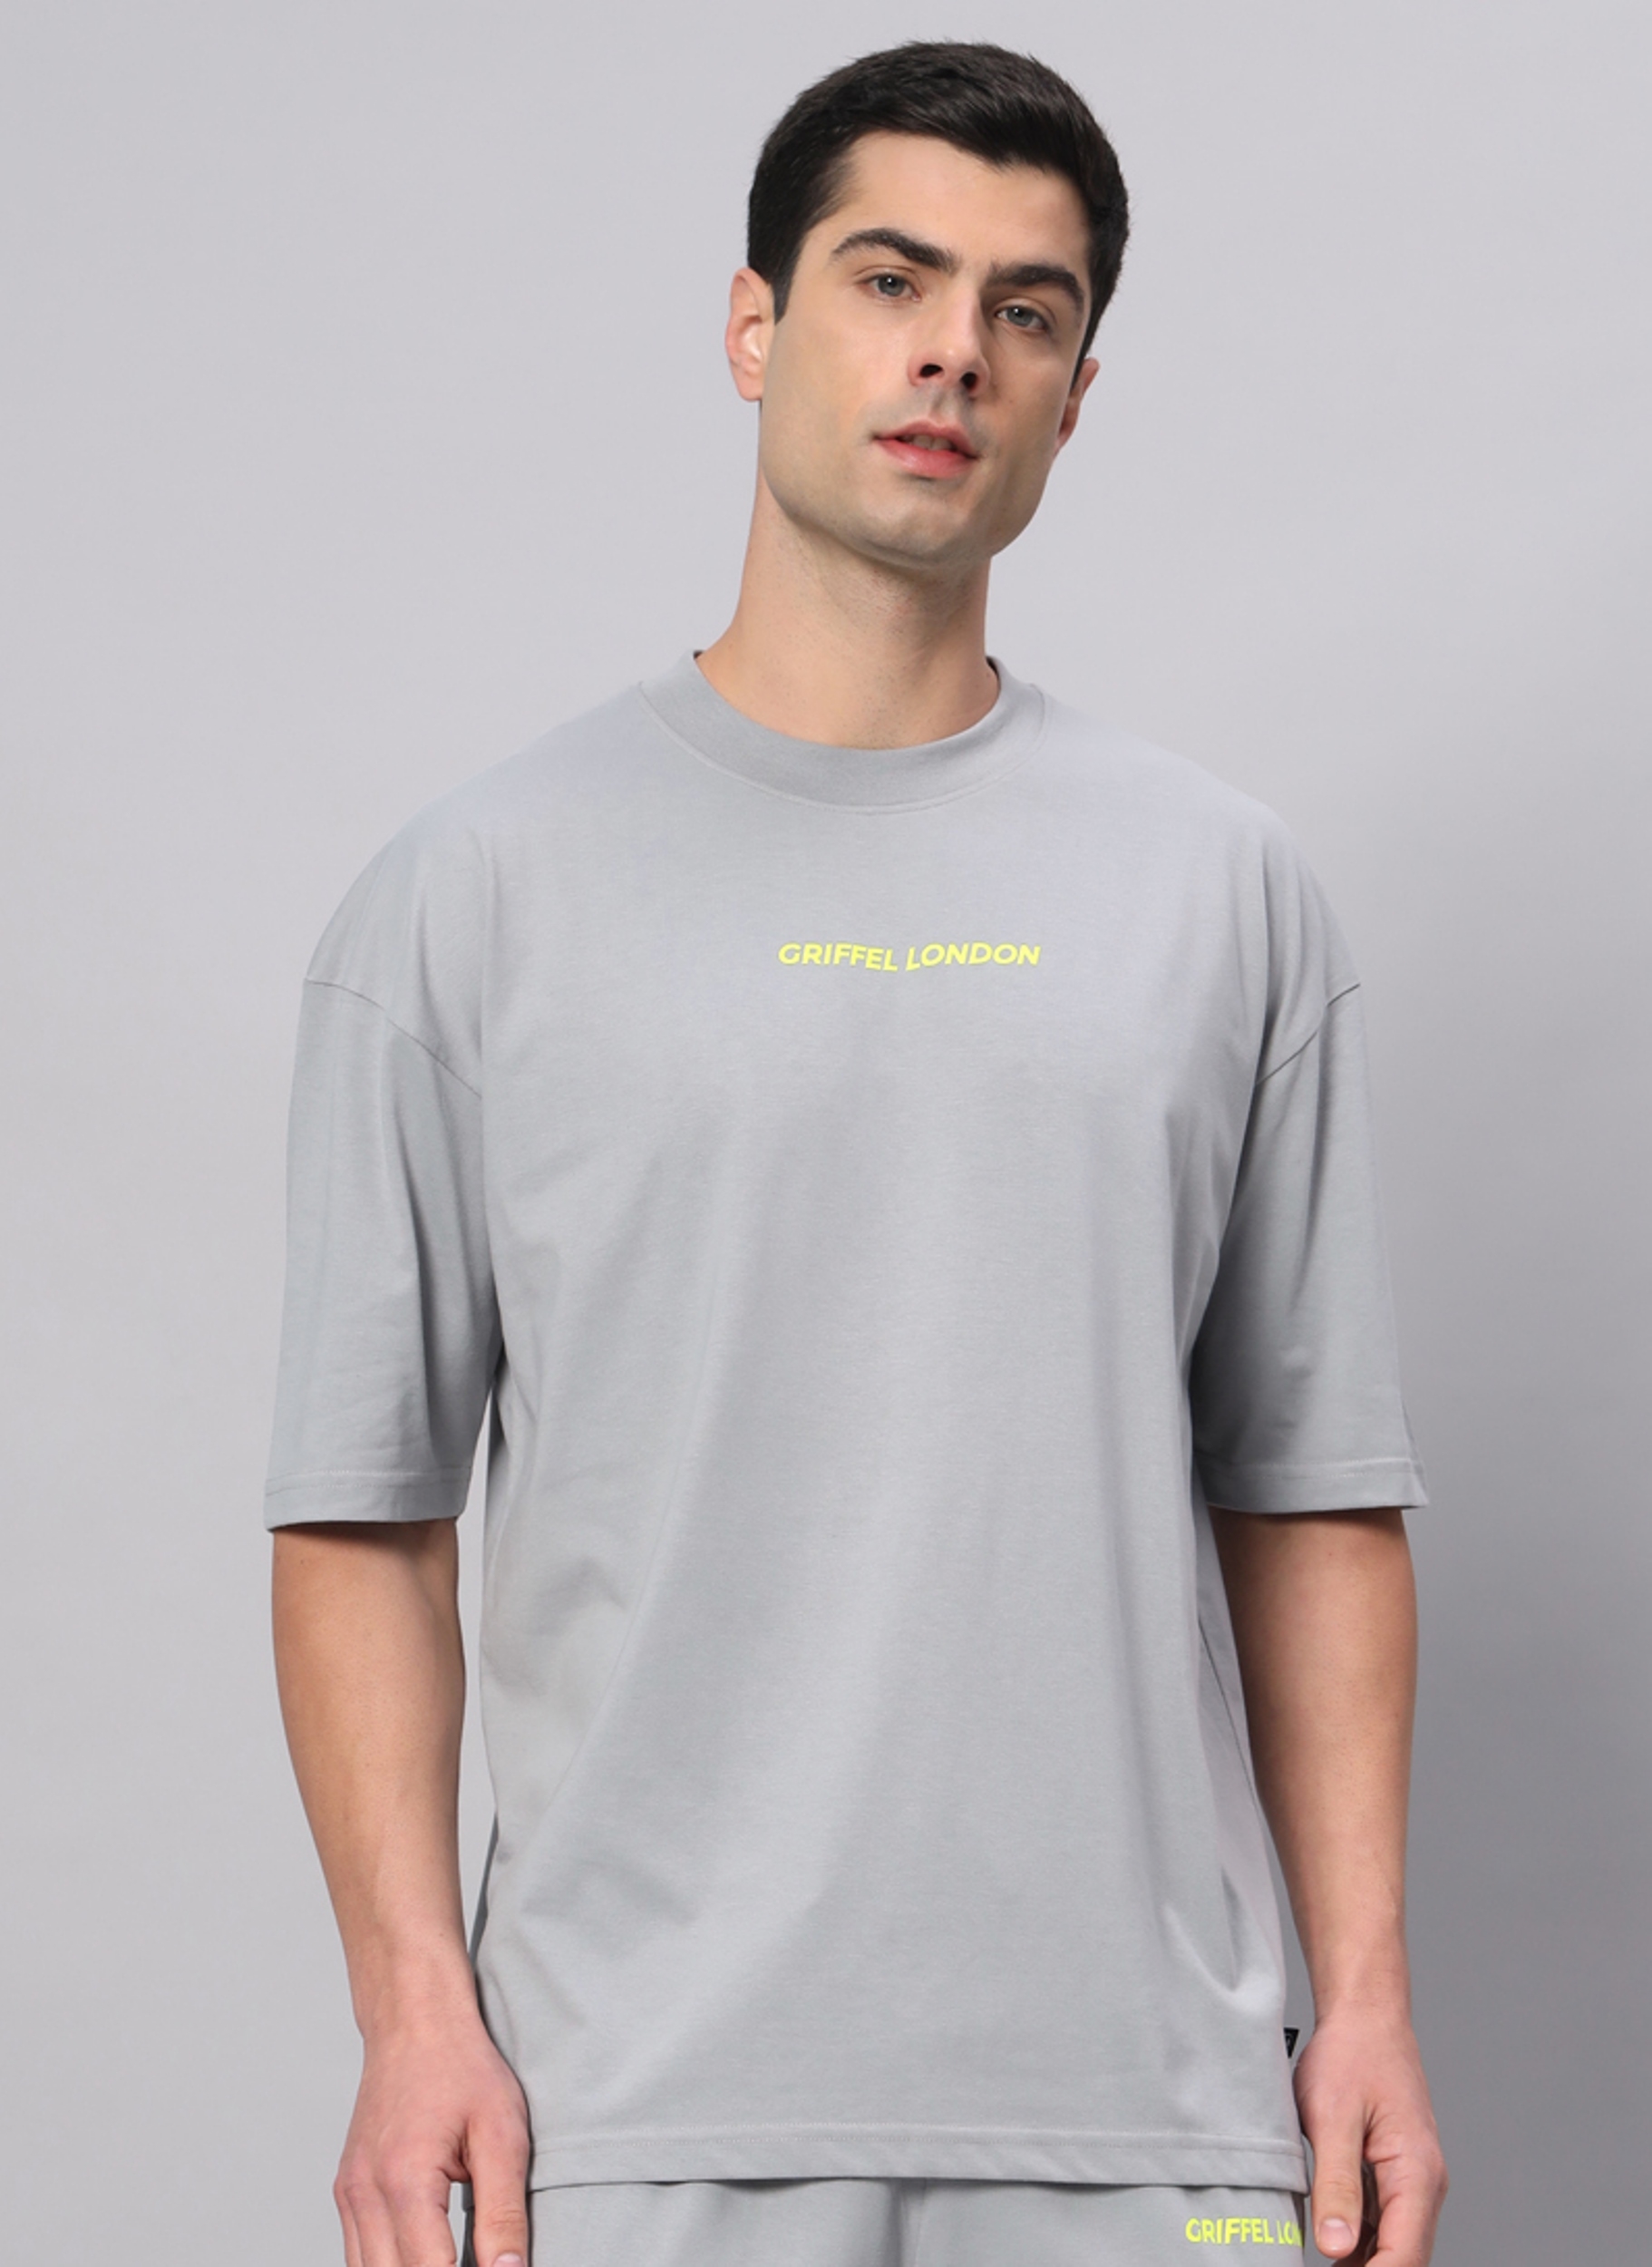 GRIFFEL | Men's Grey Cotton Loose Printed   Boxy T-Shirt s